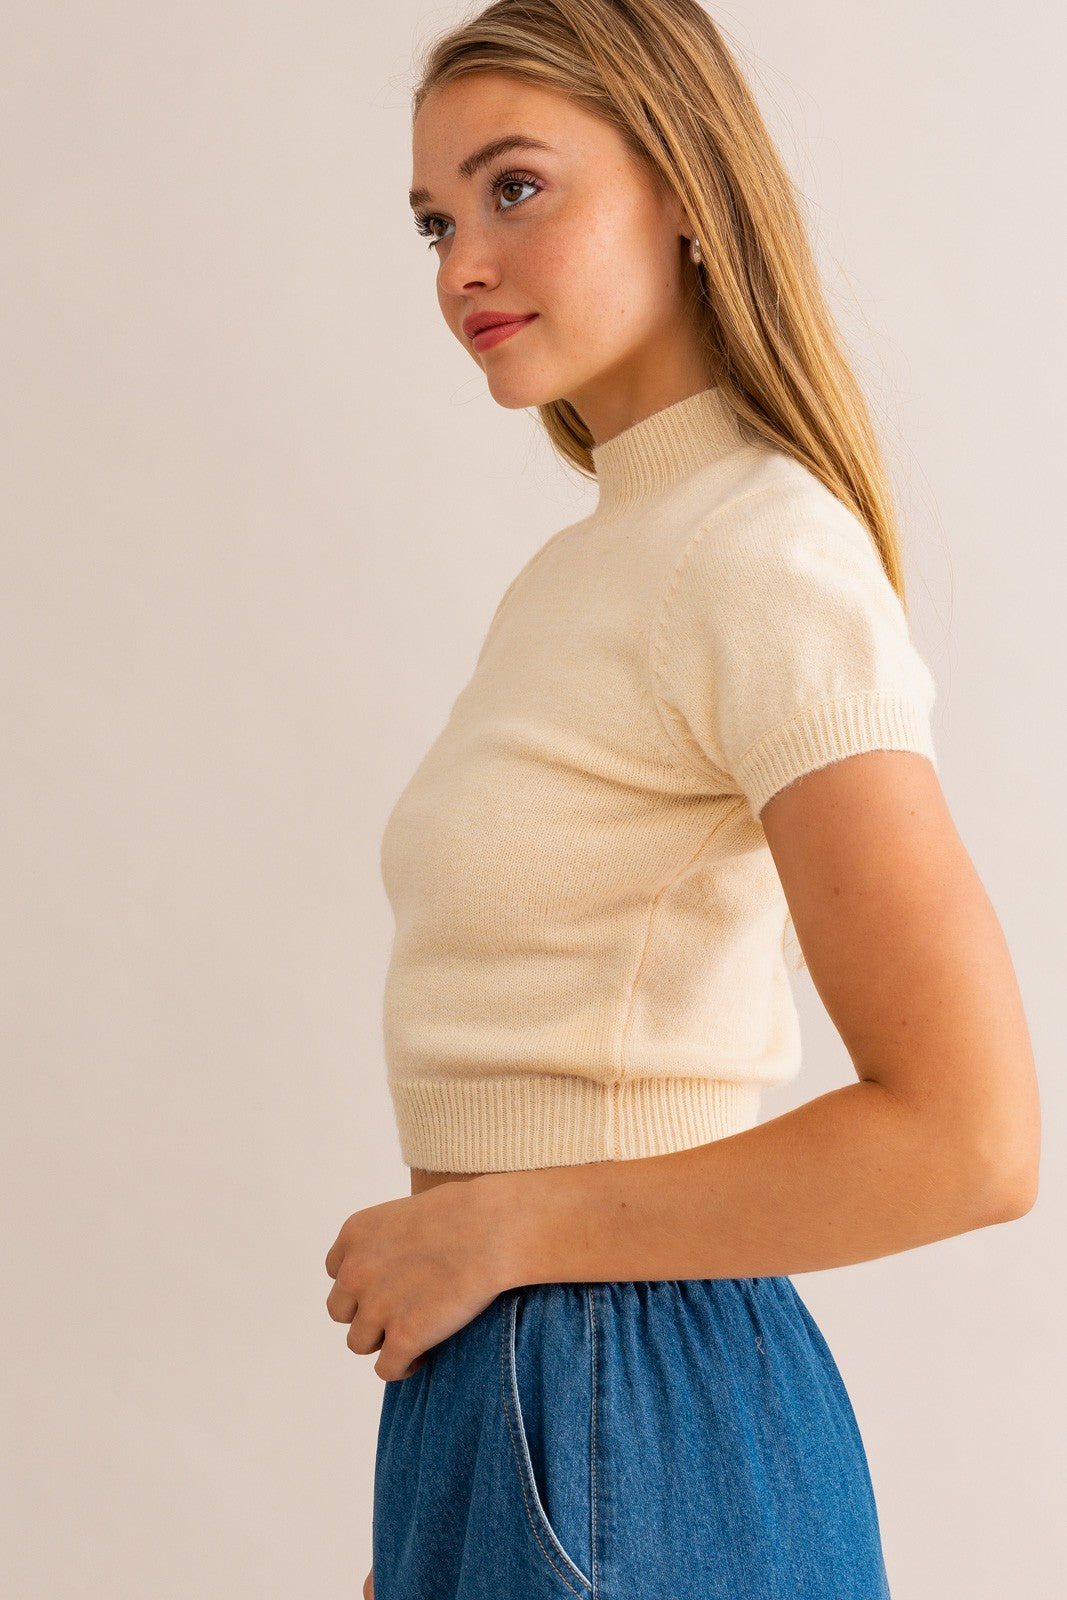 Paola Top in Cream